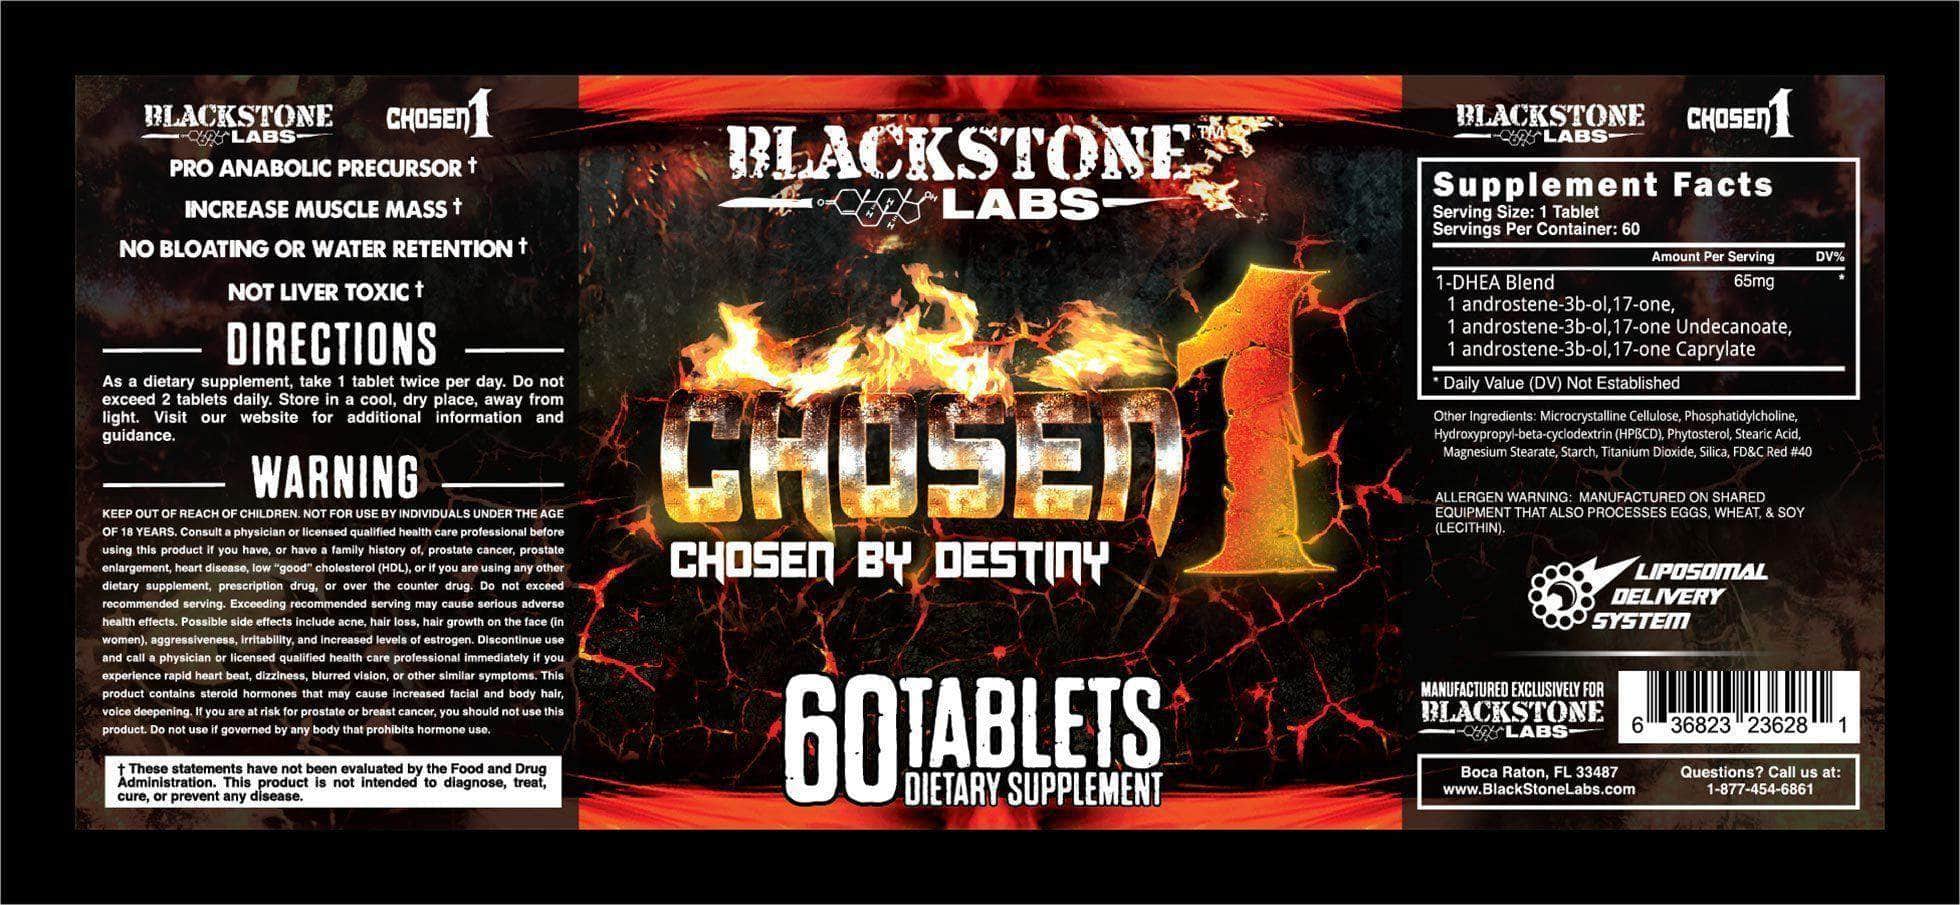 Blackstone Labs: CHOSEN1 - NutraCore Manalapan - Vitamin & Supplement and CBD Store